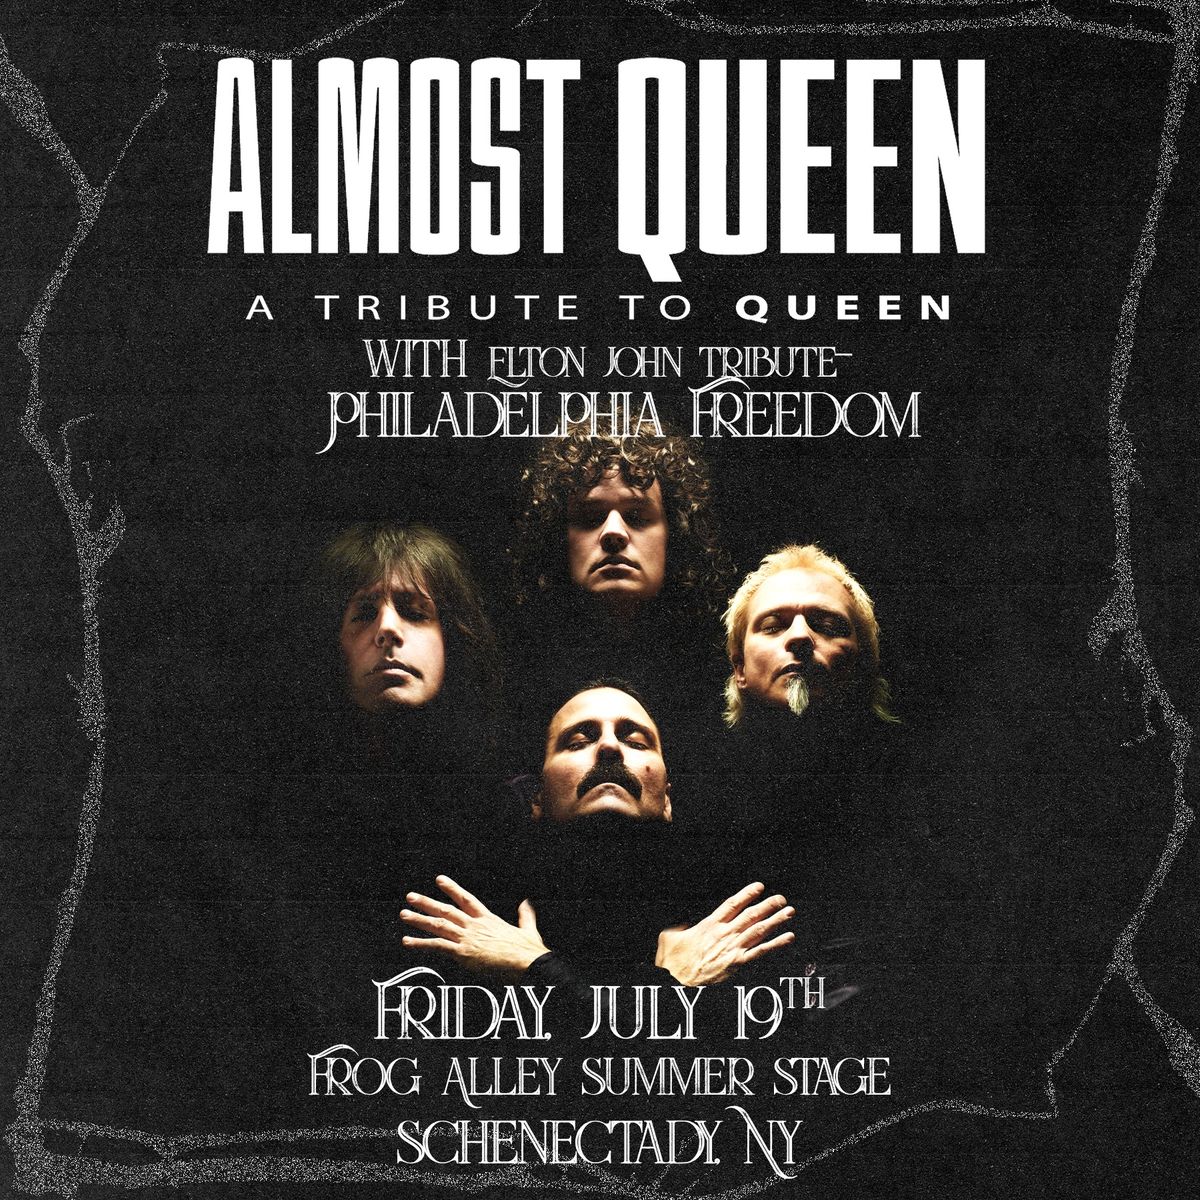 Almost Queen & Philadelphia Freedom at Frog Alley \ud83c\udfb9\ud83c\udf7a